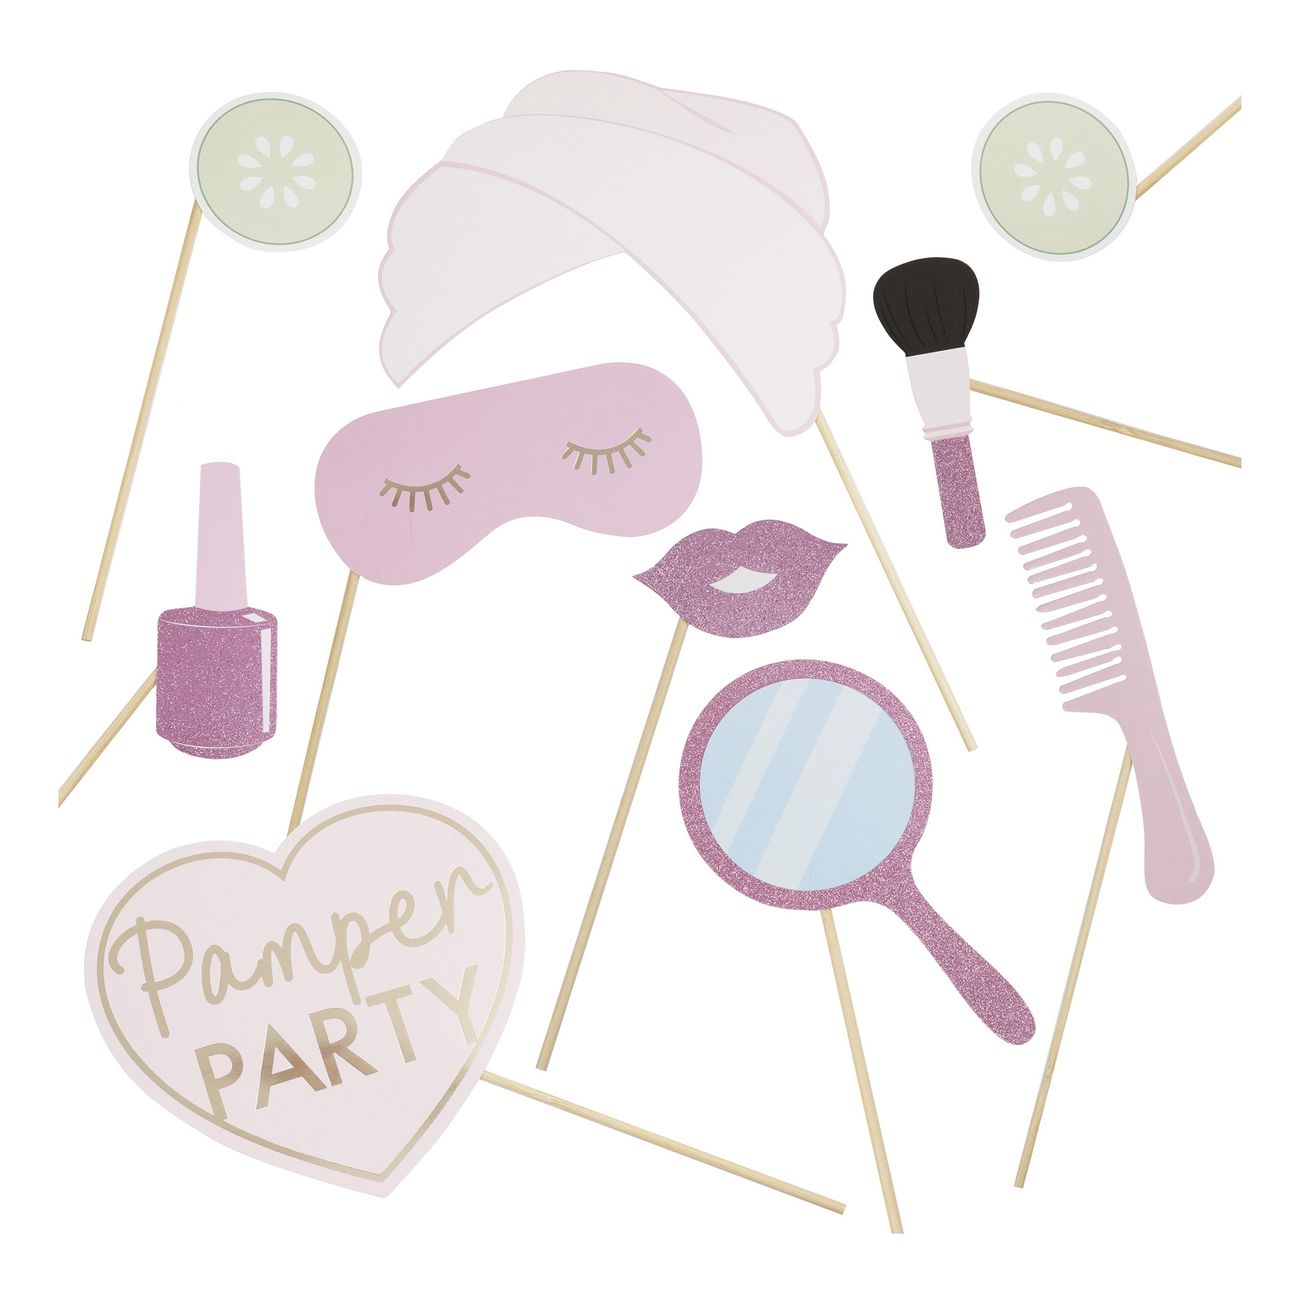 fotoprops-pamper-party-rosa-85114-2